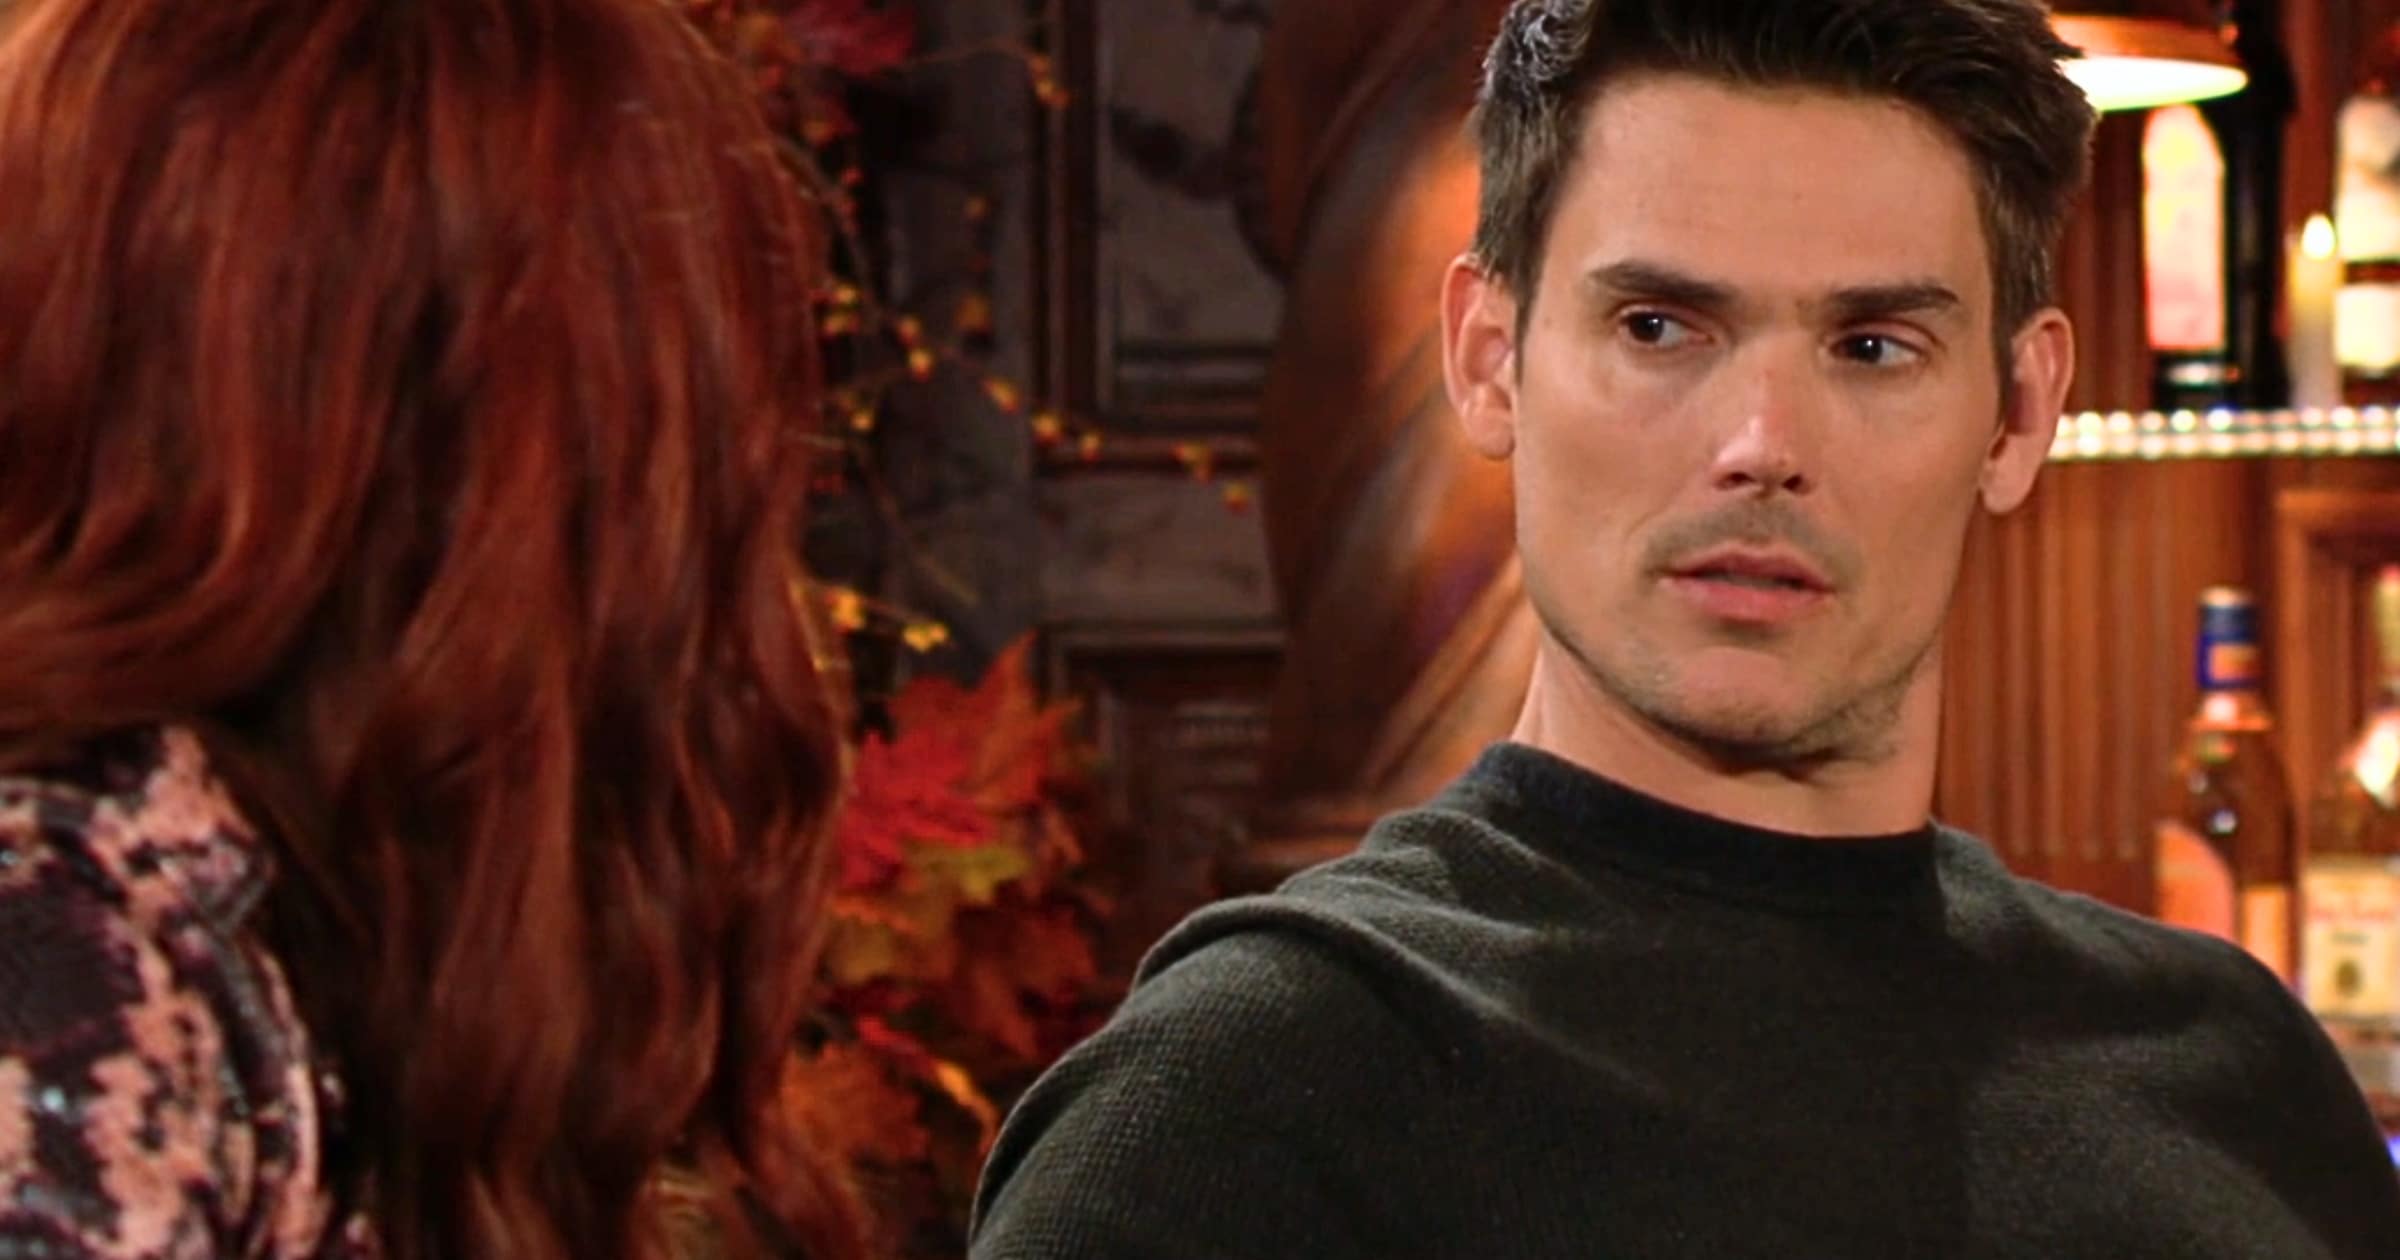 The Young and the Restless - Nov 27 - Sally and Adam